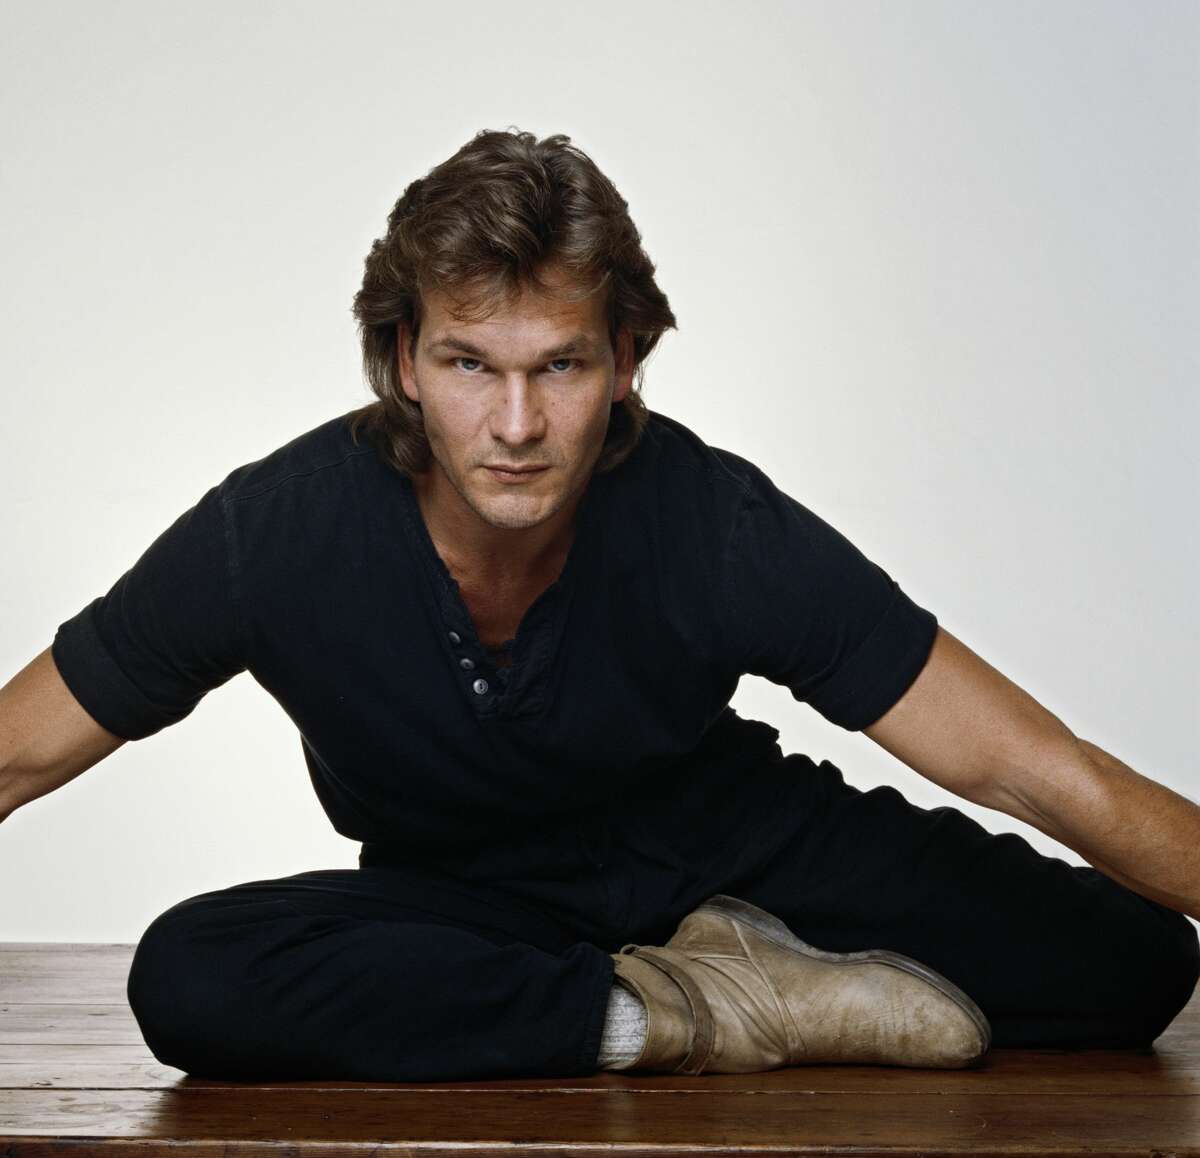 PHOTOS: A new documentary about Houston-born Patrick Swayze celebrates the life and legacy of the prolific Hollywood figure. >>> See Patrick Swayze through the years ...